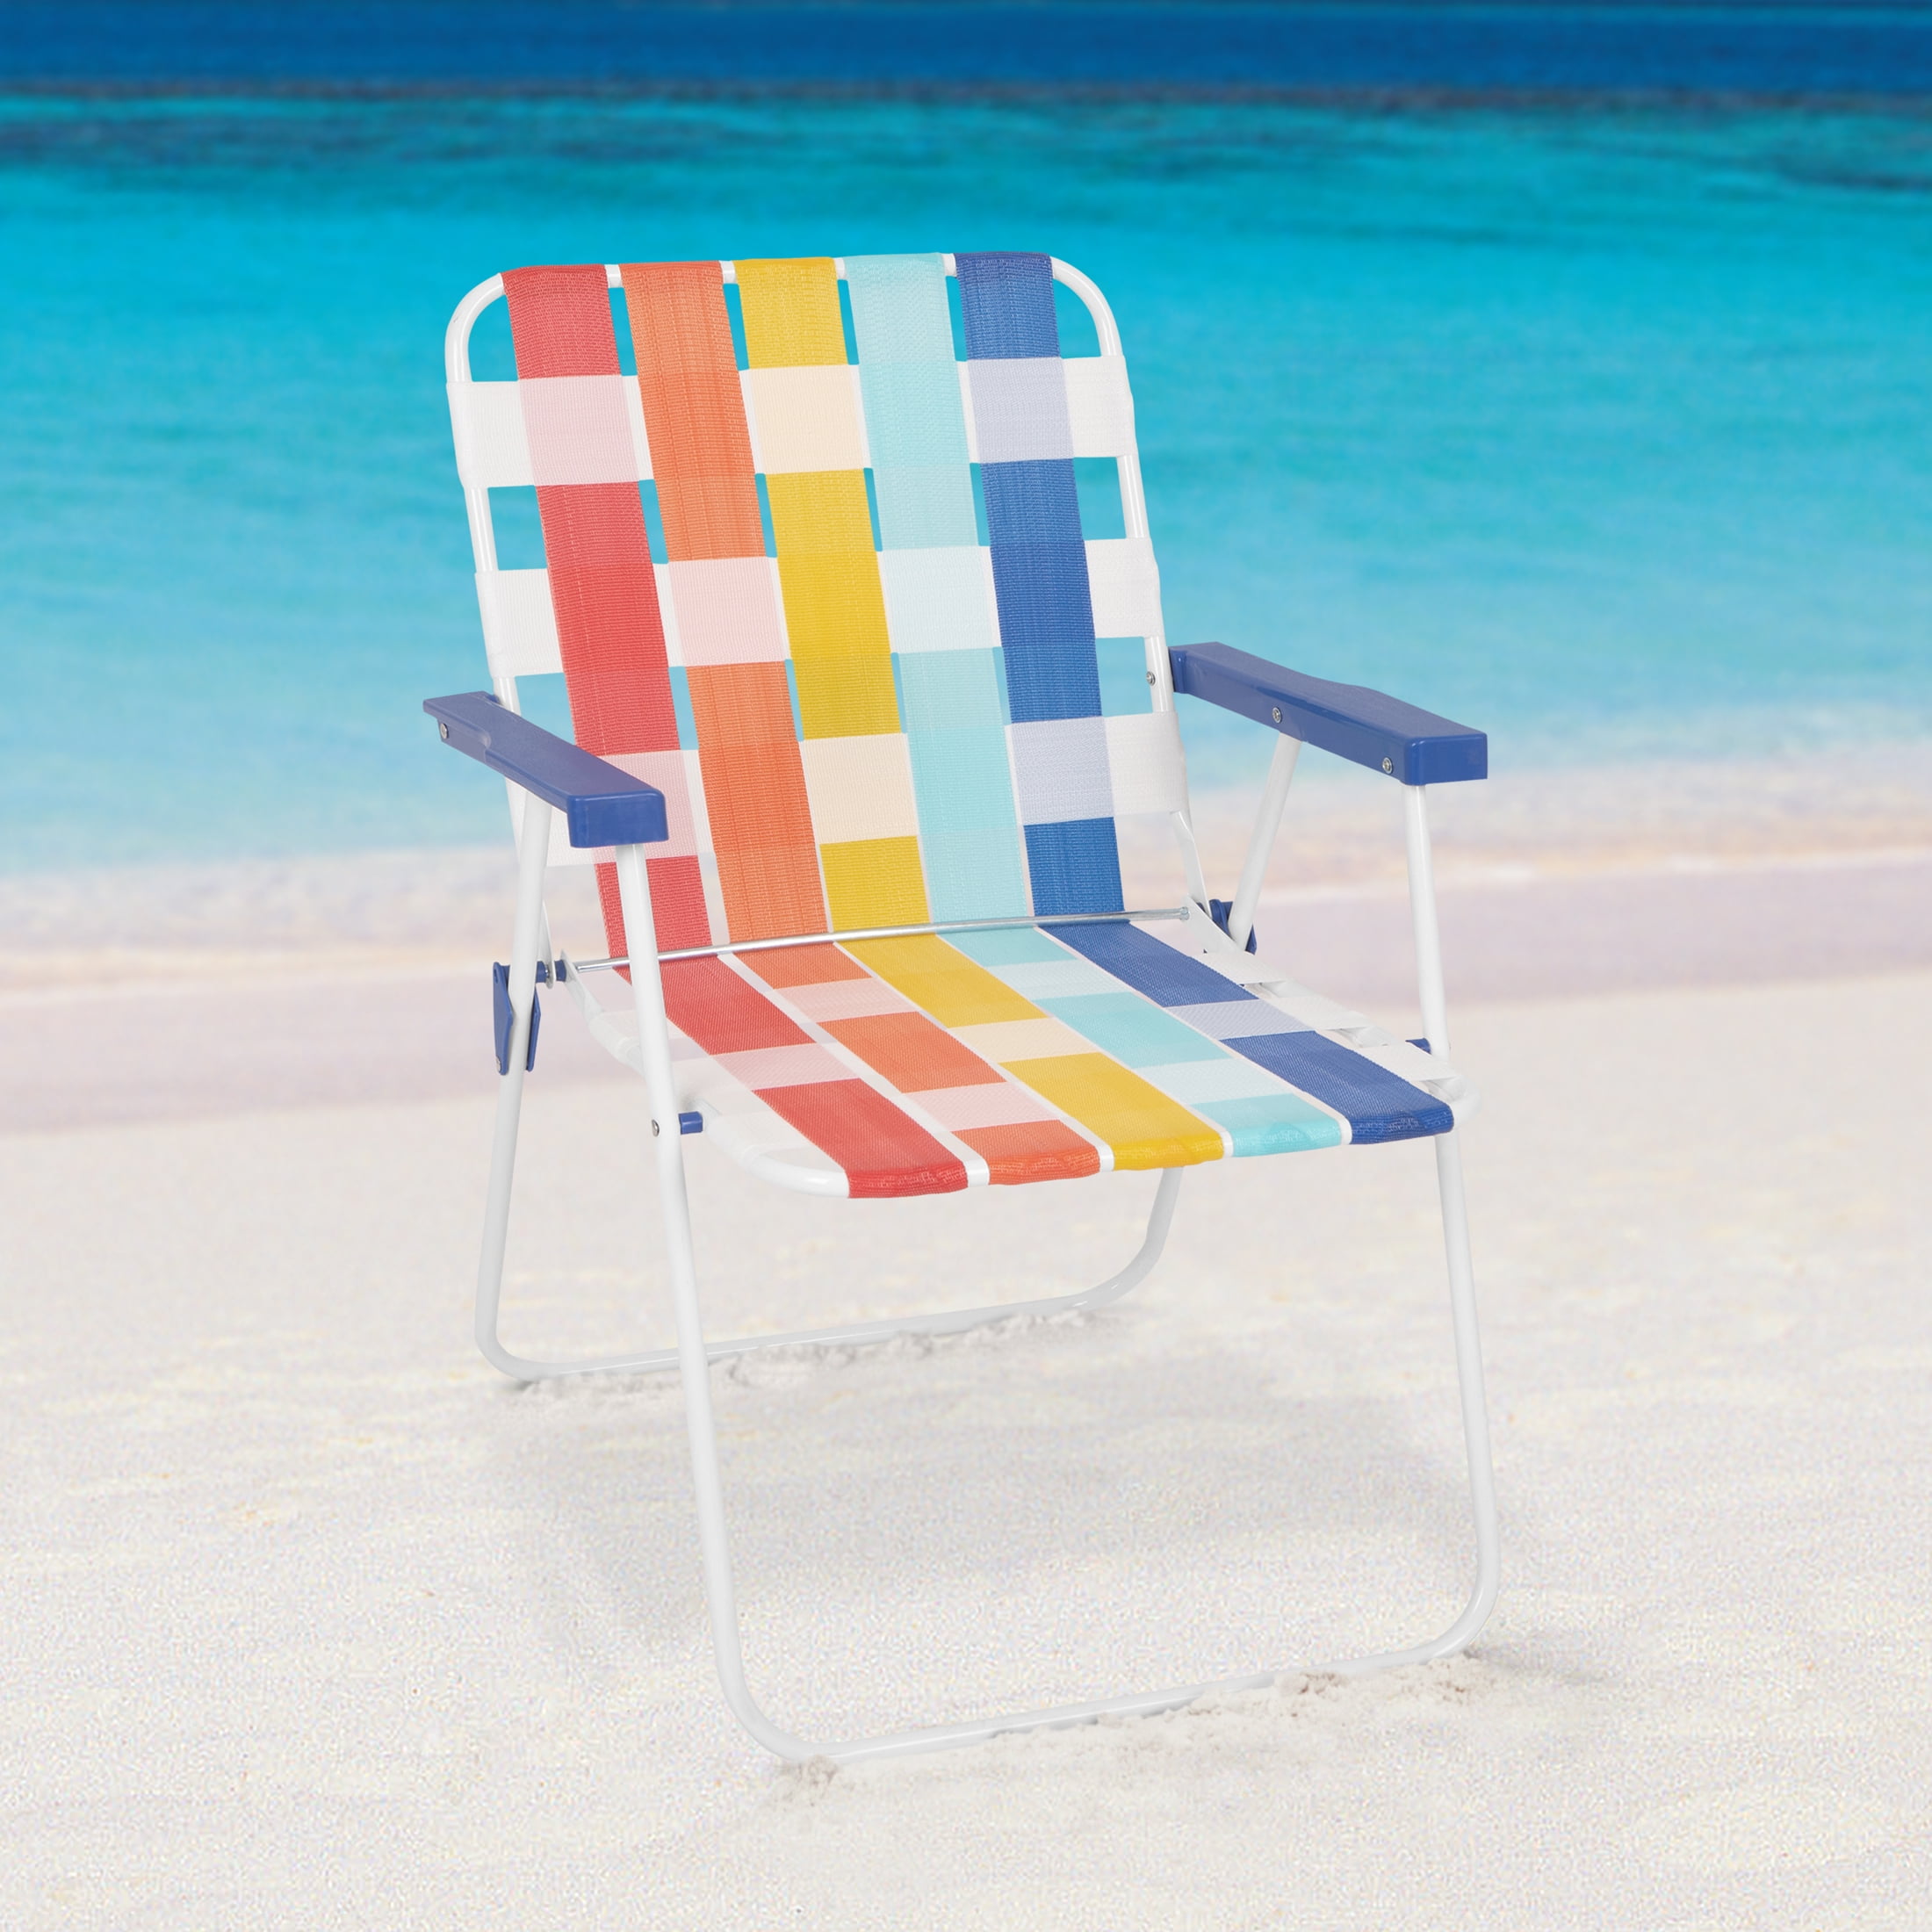 Details about   Mainstays Folding Beach Chair with Carry Bag Blue 2 pack free shipping USA 